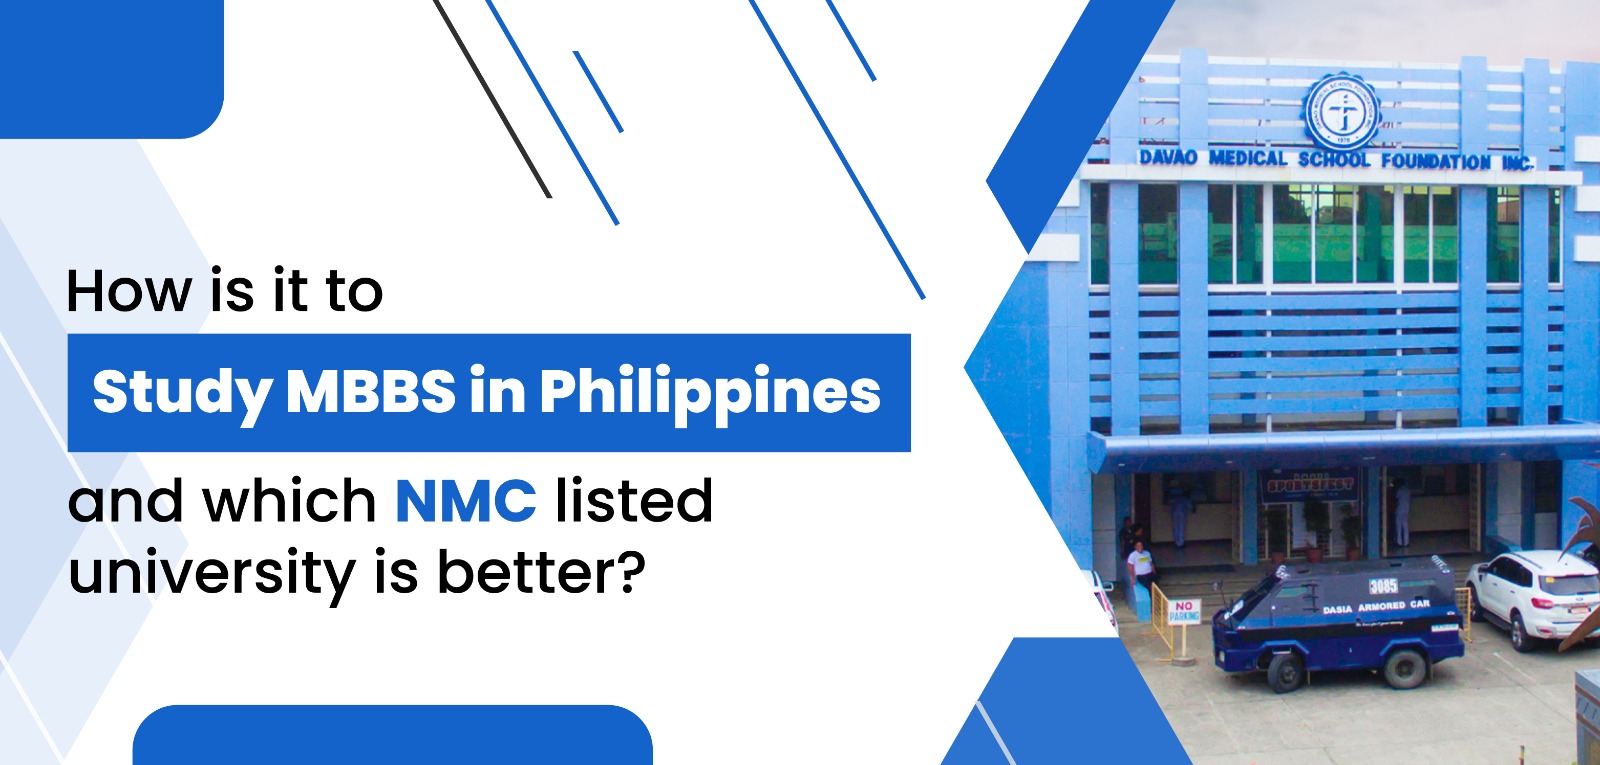 How is it to study MBBS in Philippines and which NMC listed university is better?